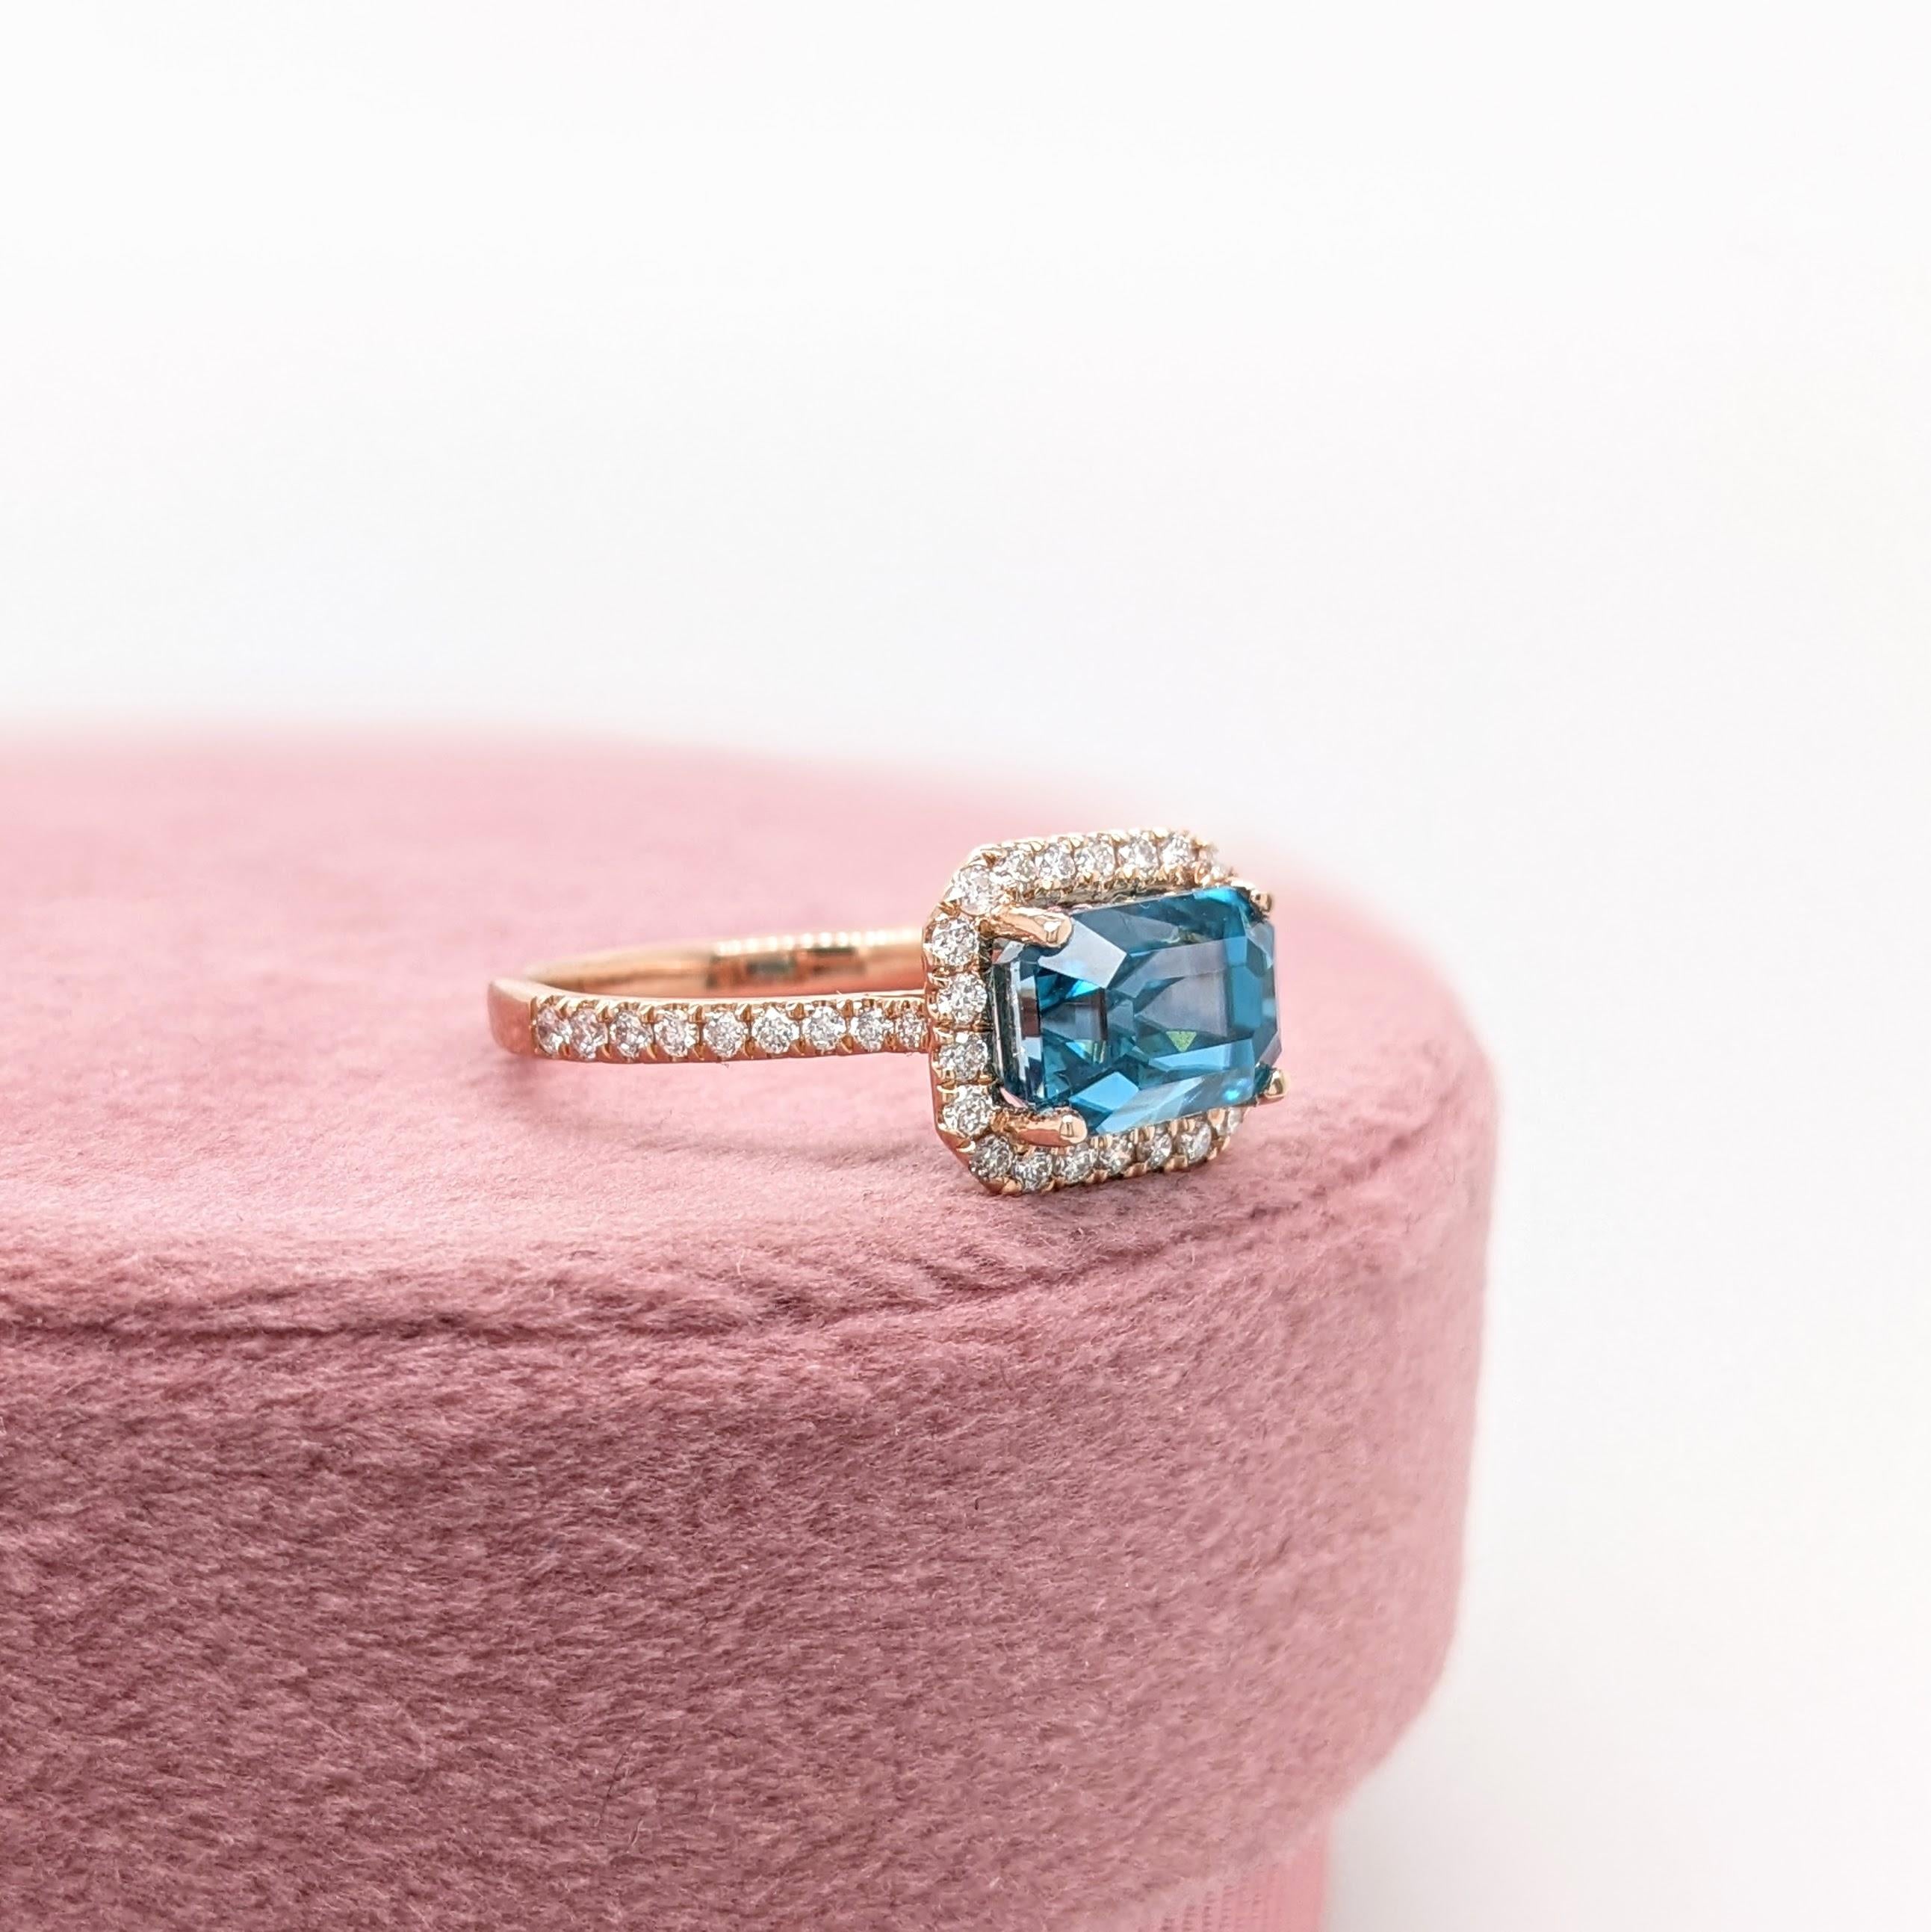 4.5ct Blue Zircon East West Ring w Natural Diamonds in Solid 14K Gold EM 8x6mm